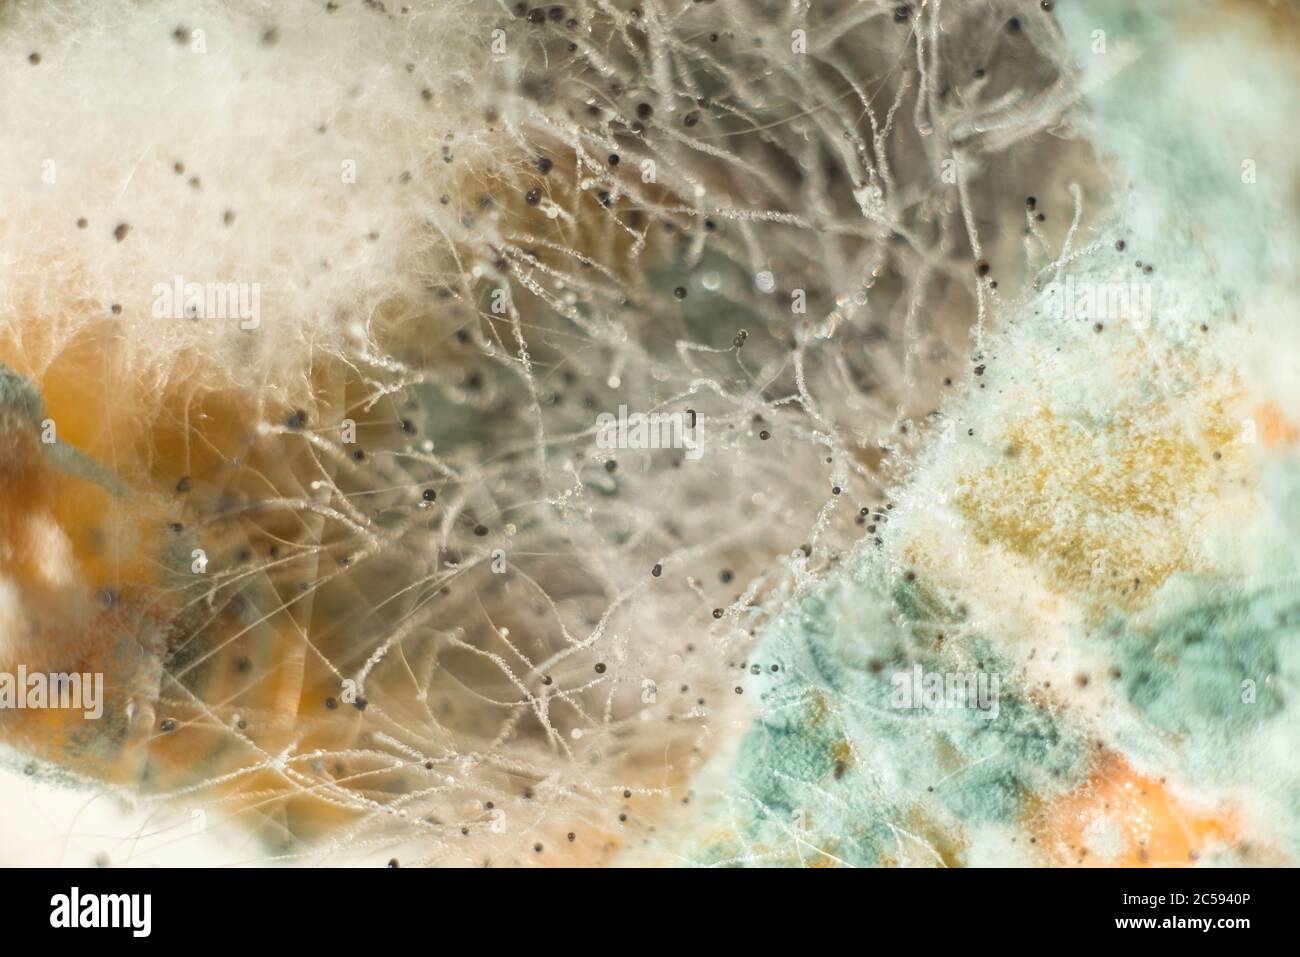 macro photography close-up of penicillin, green mold, white fluff of ...